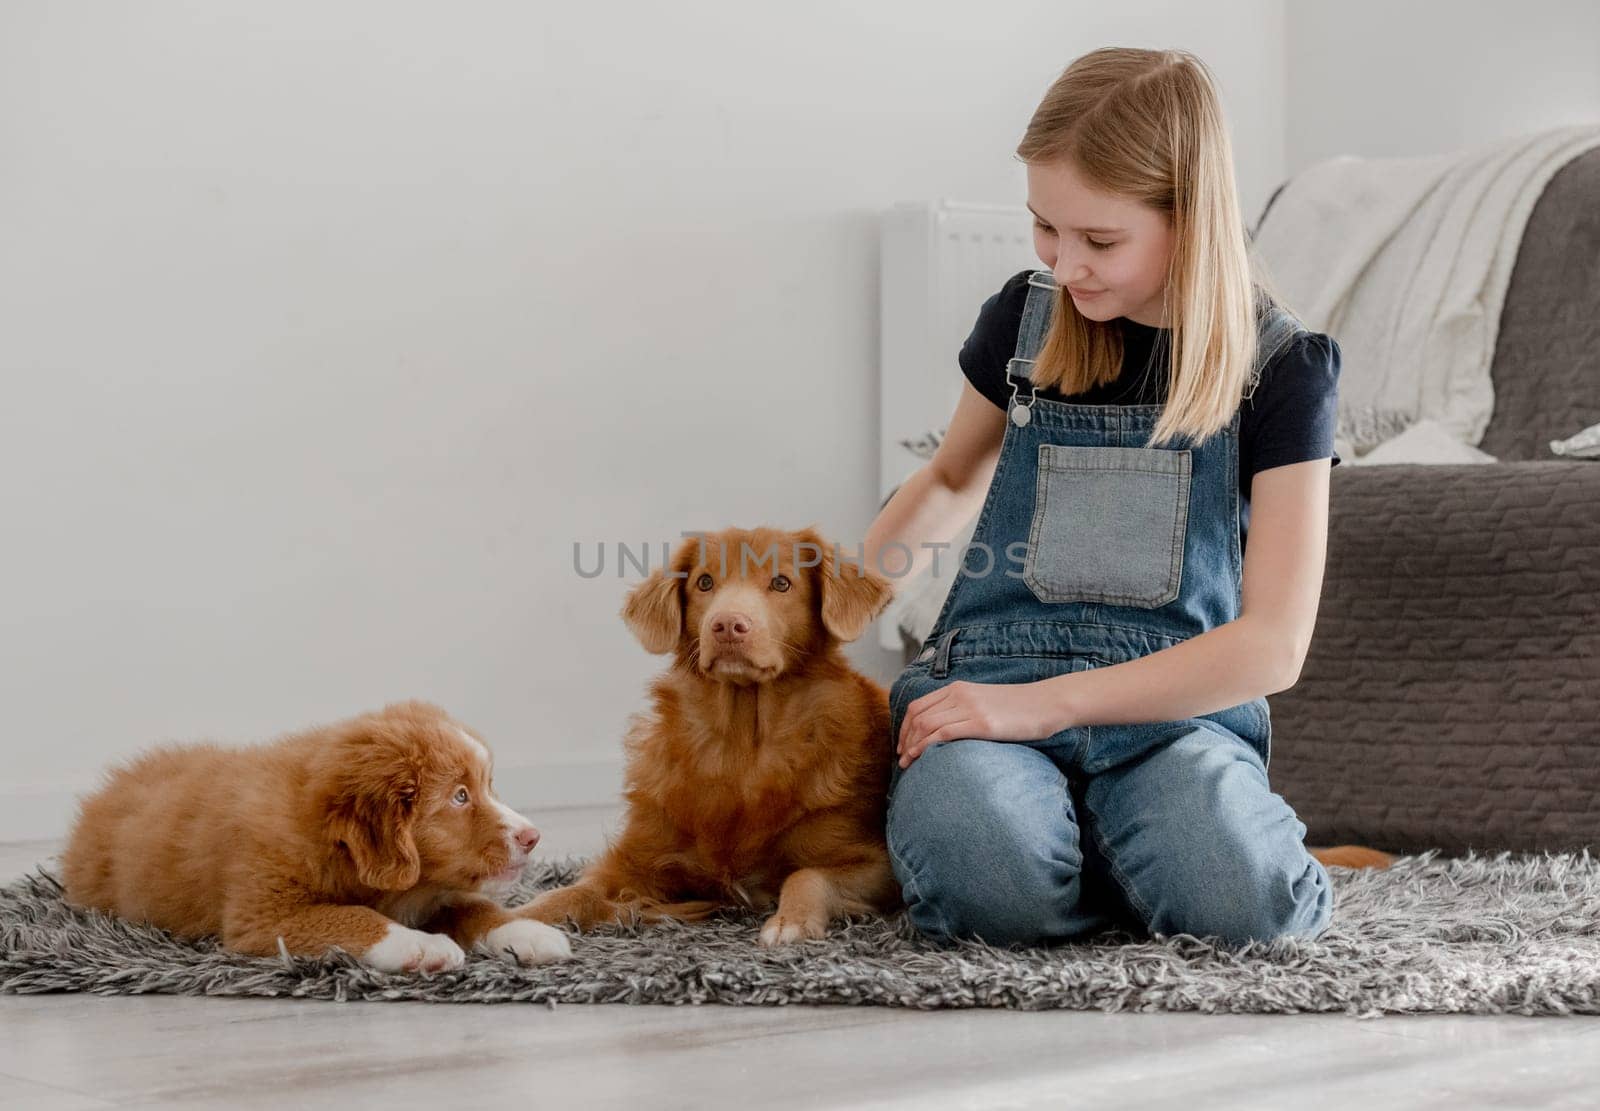 11-Year-Old Girl Plays With Nova Scotia Retriever And Its Puppy On Home Floor by tan4ikk1